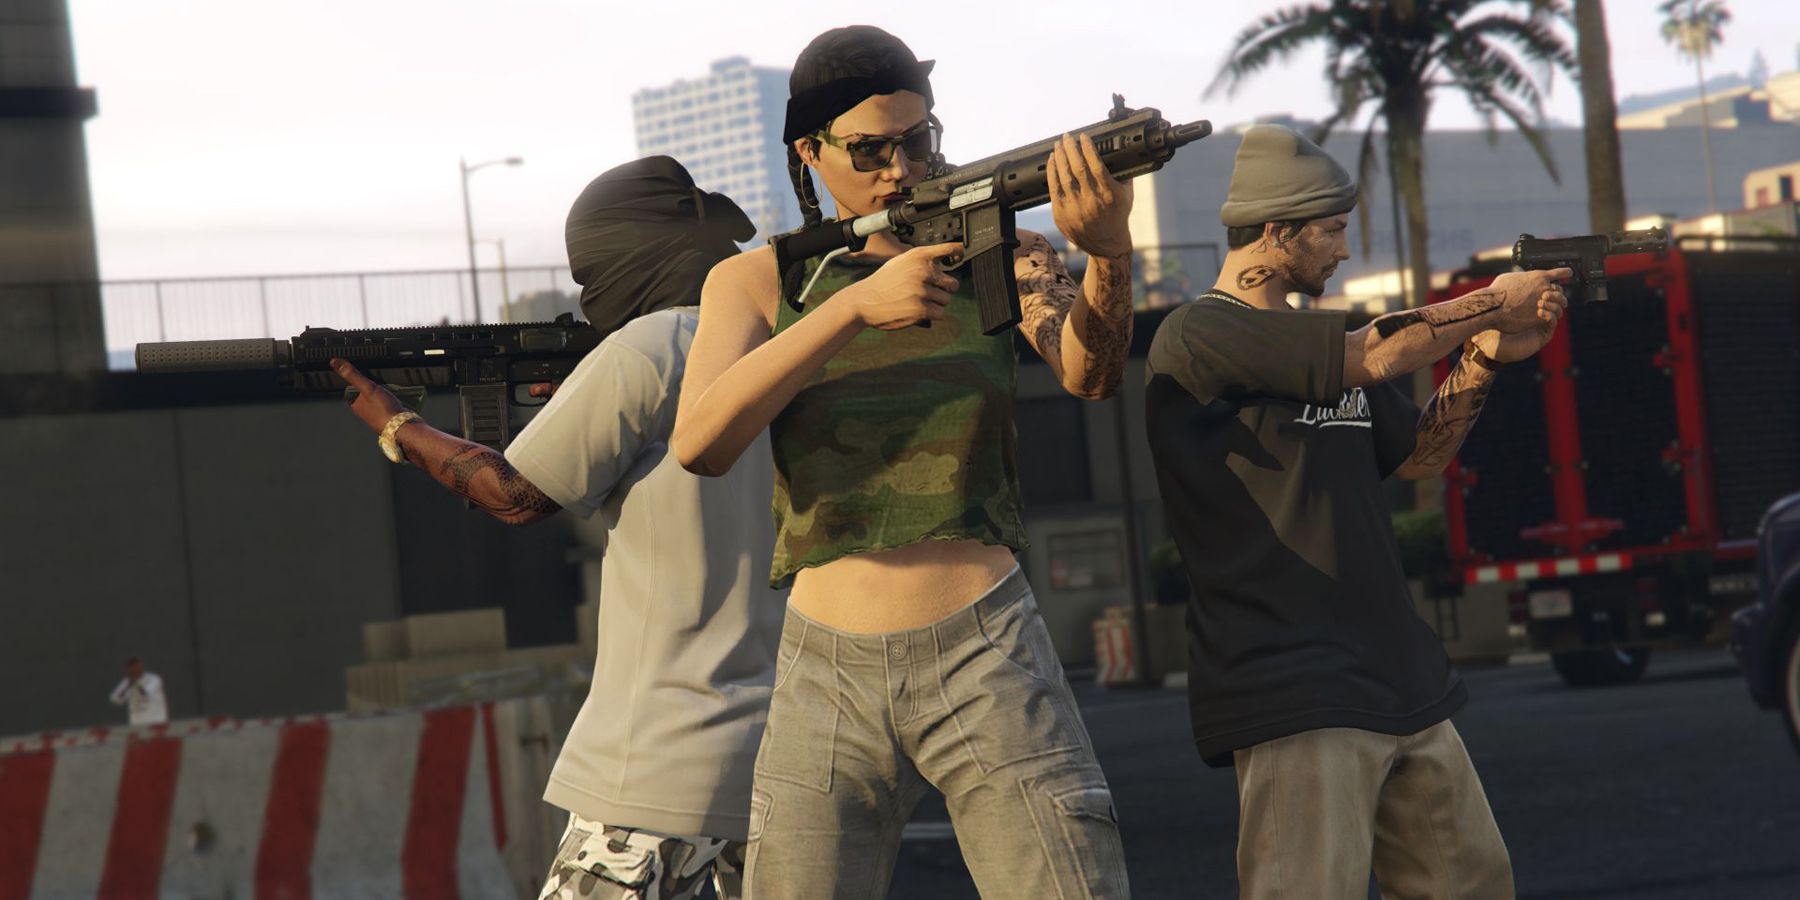 GTA Online player characters